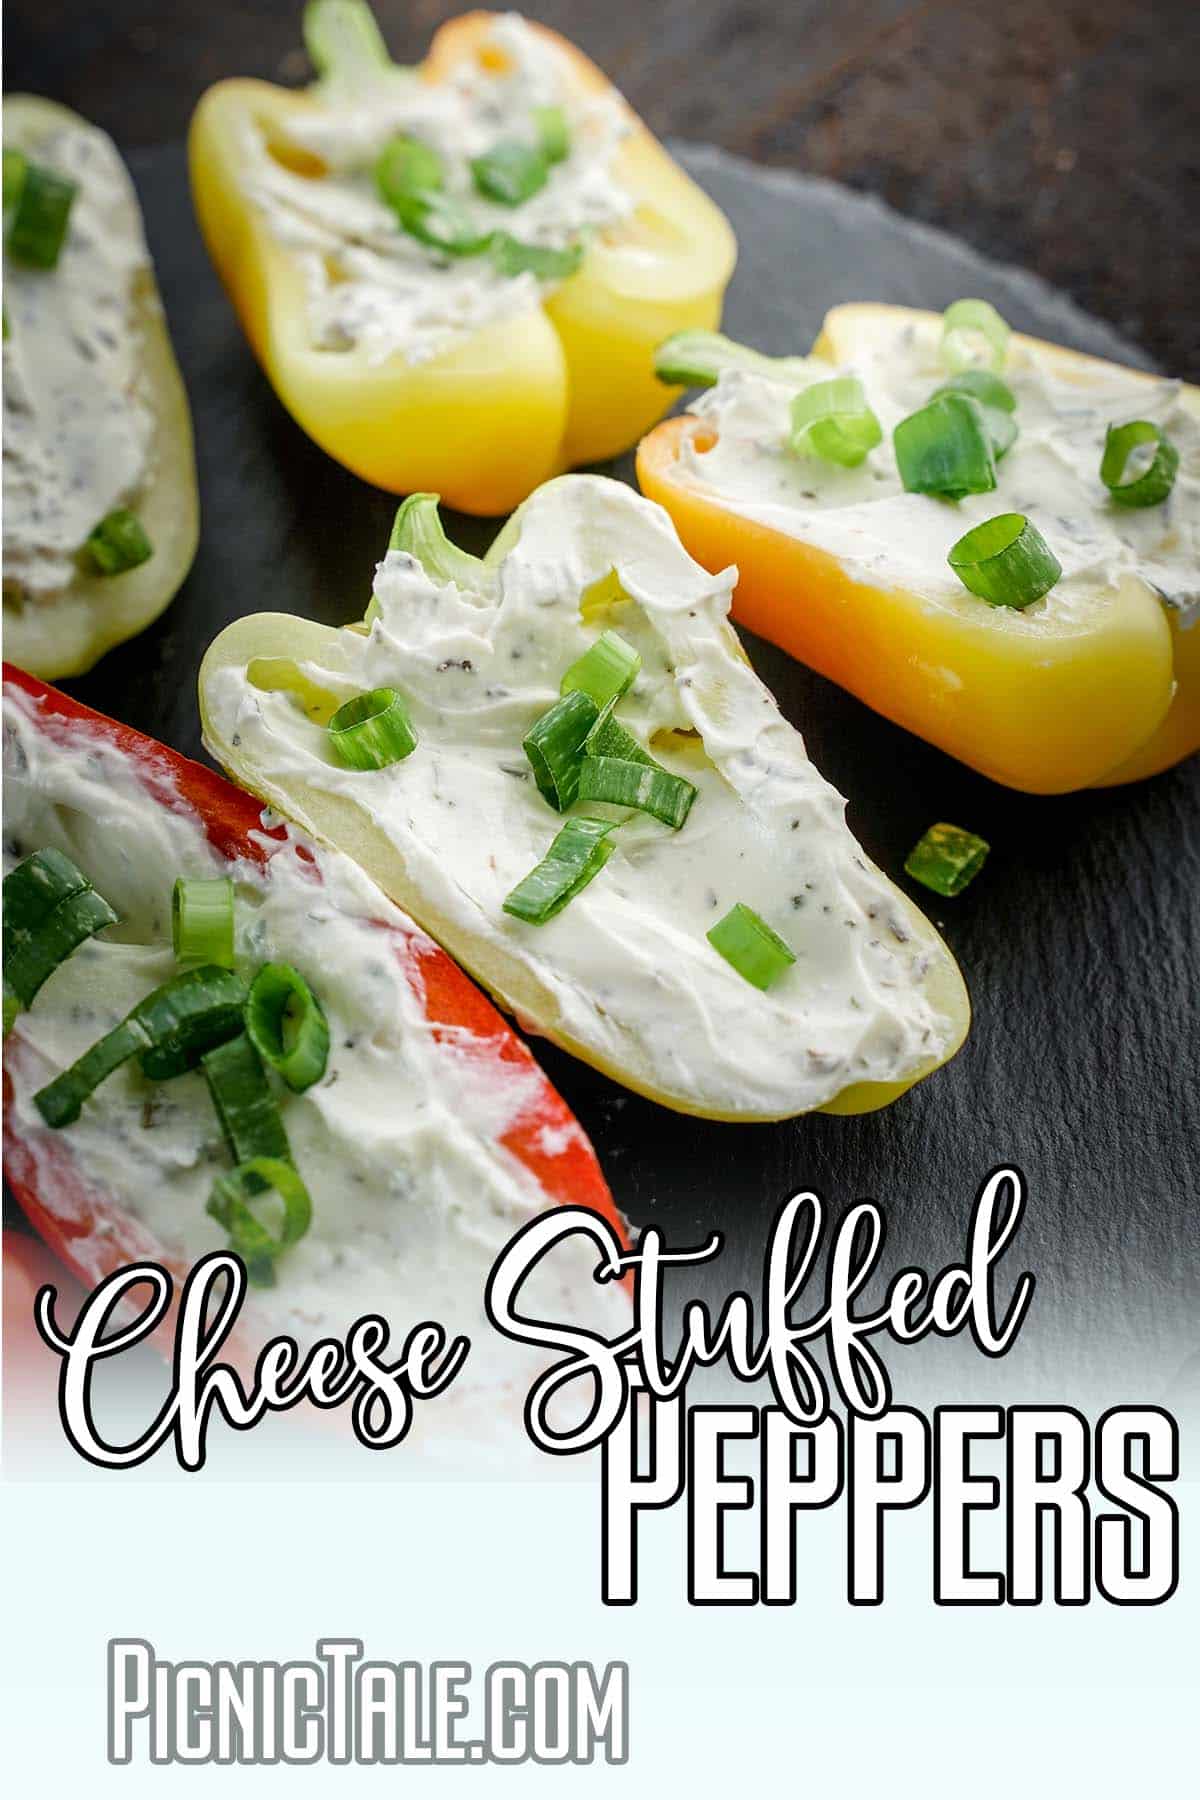 cheese stuffed bab peppers with text which reads cheese stuffed peppers